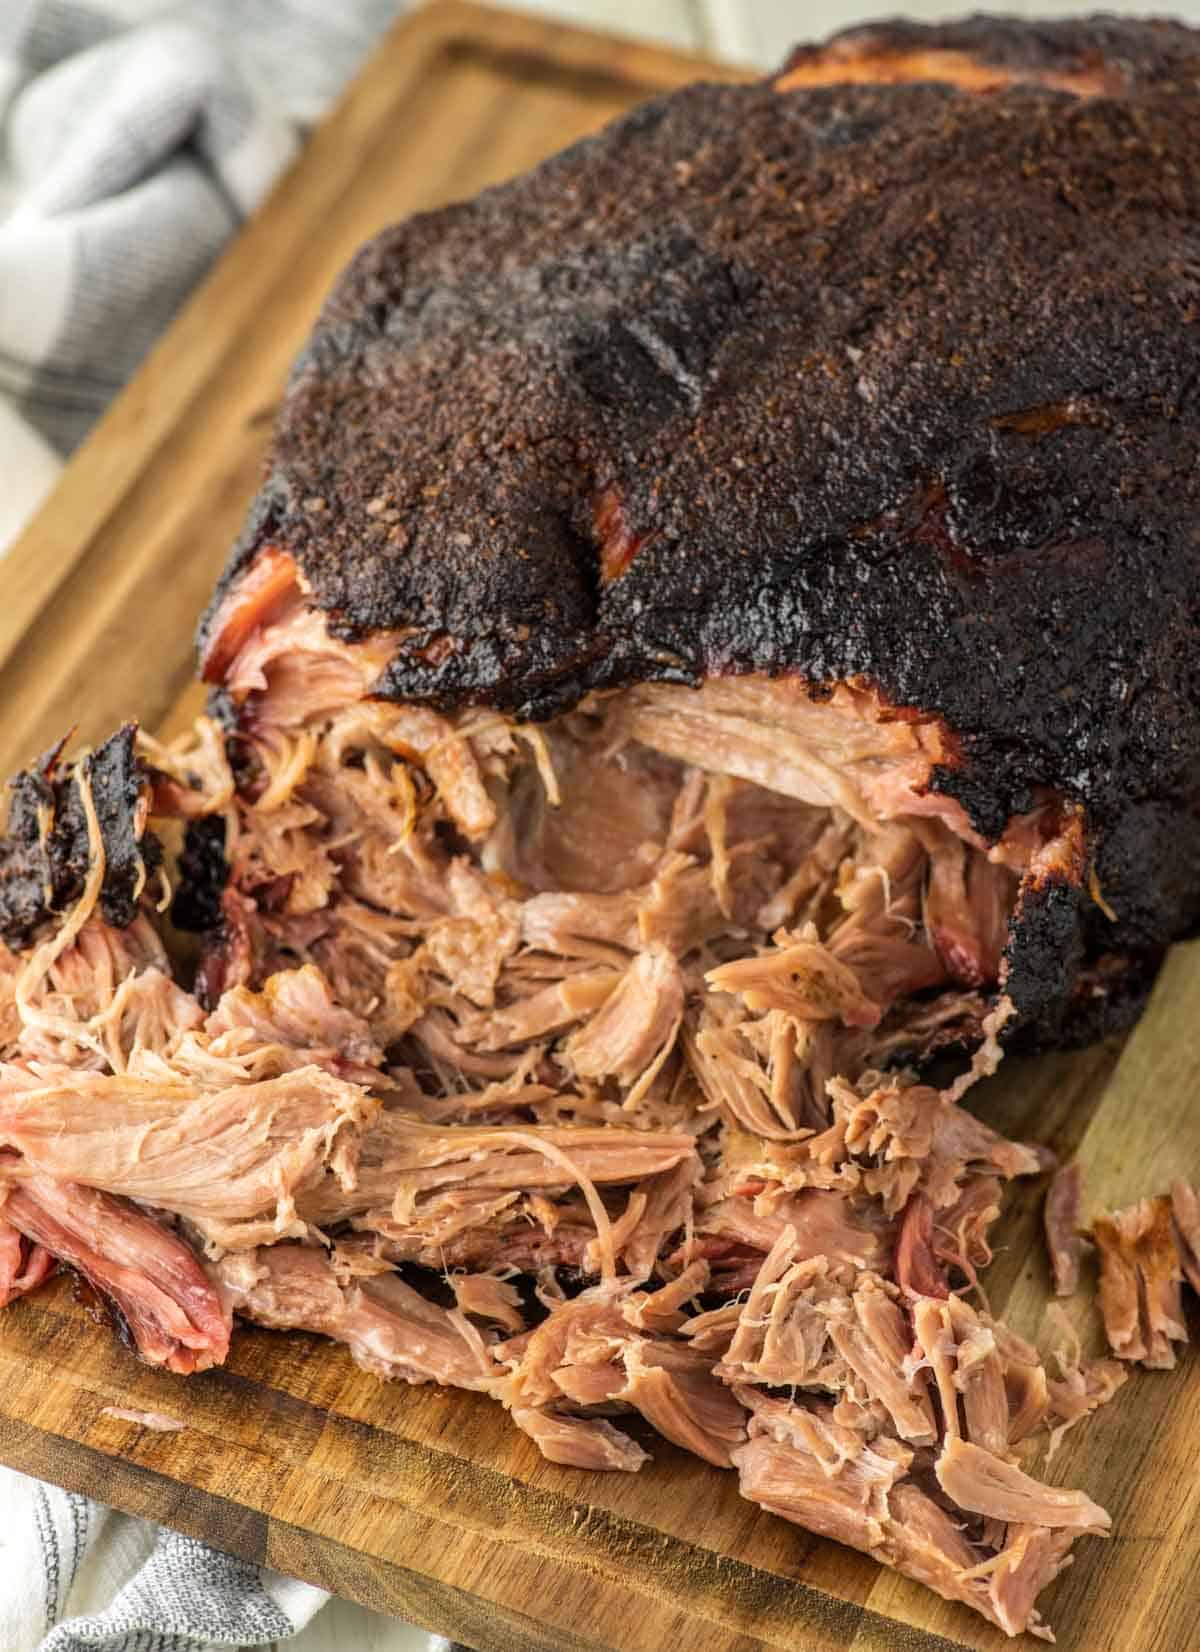 pulled pork pulled out from pork butt on cutting board